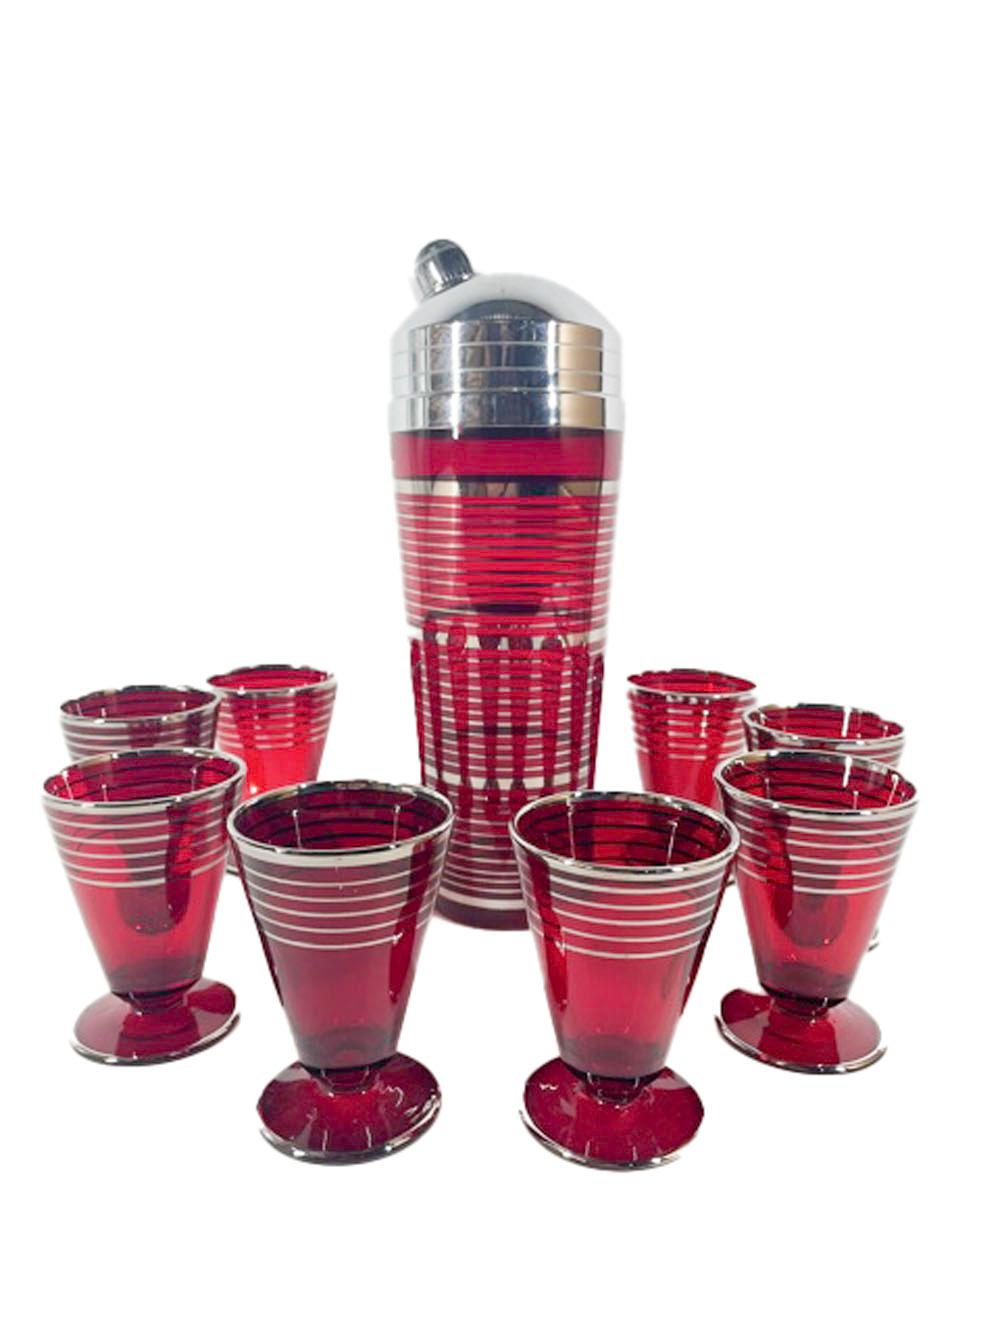 Art Deco Paden City Glass Ruby Red Cocktail Shaker Set with Silver Bands 3